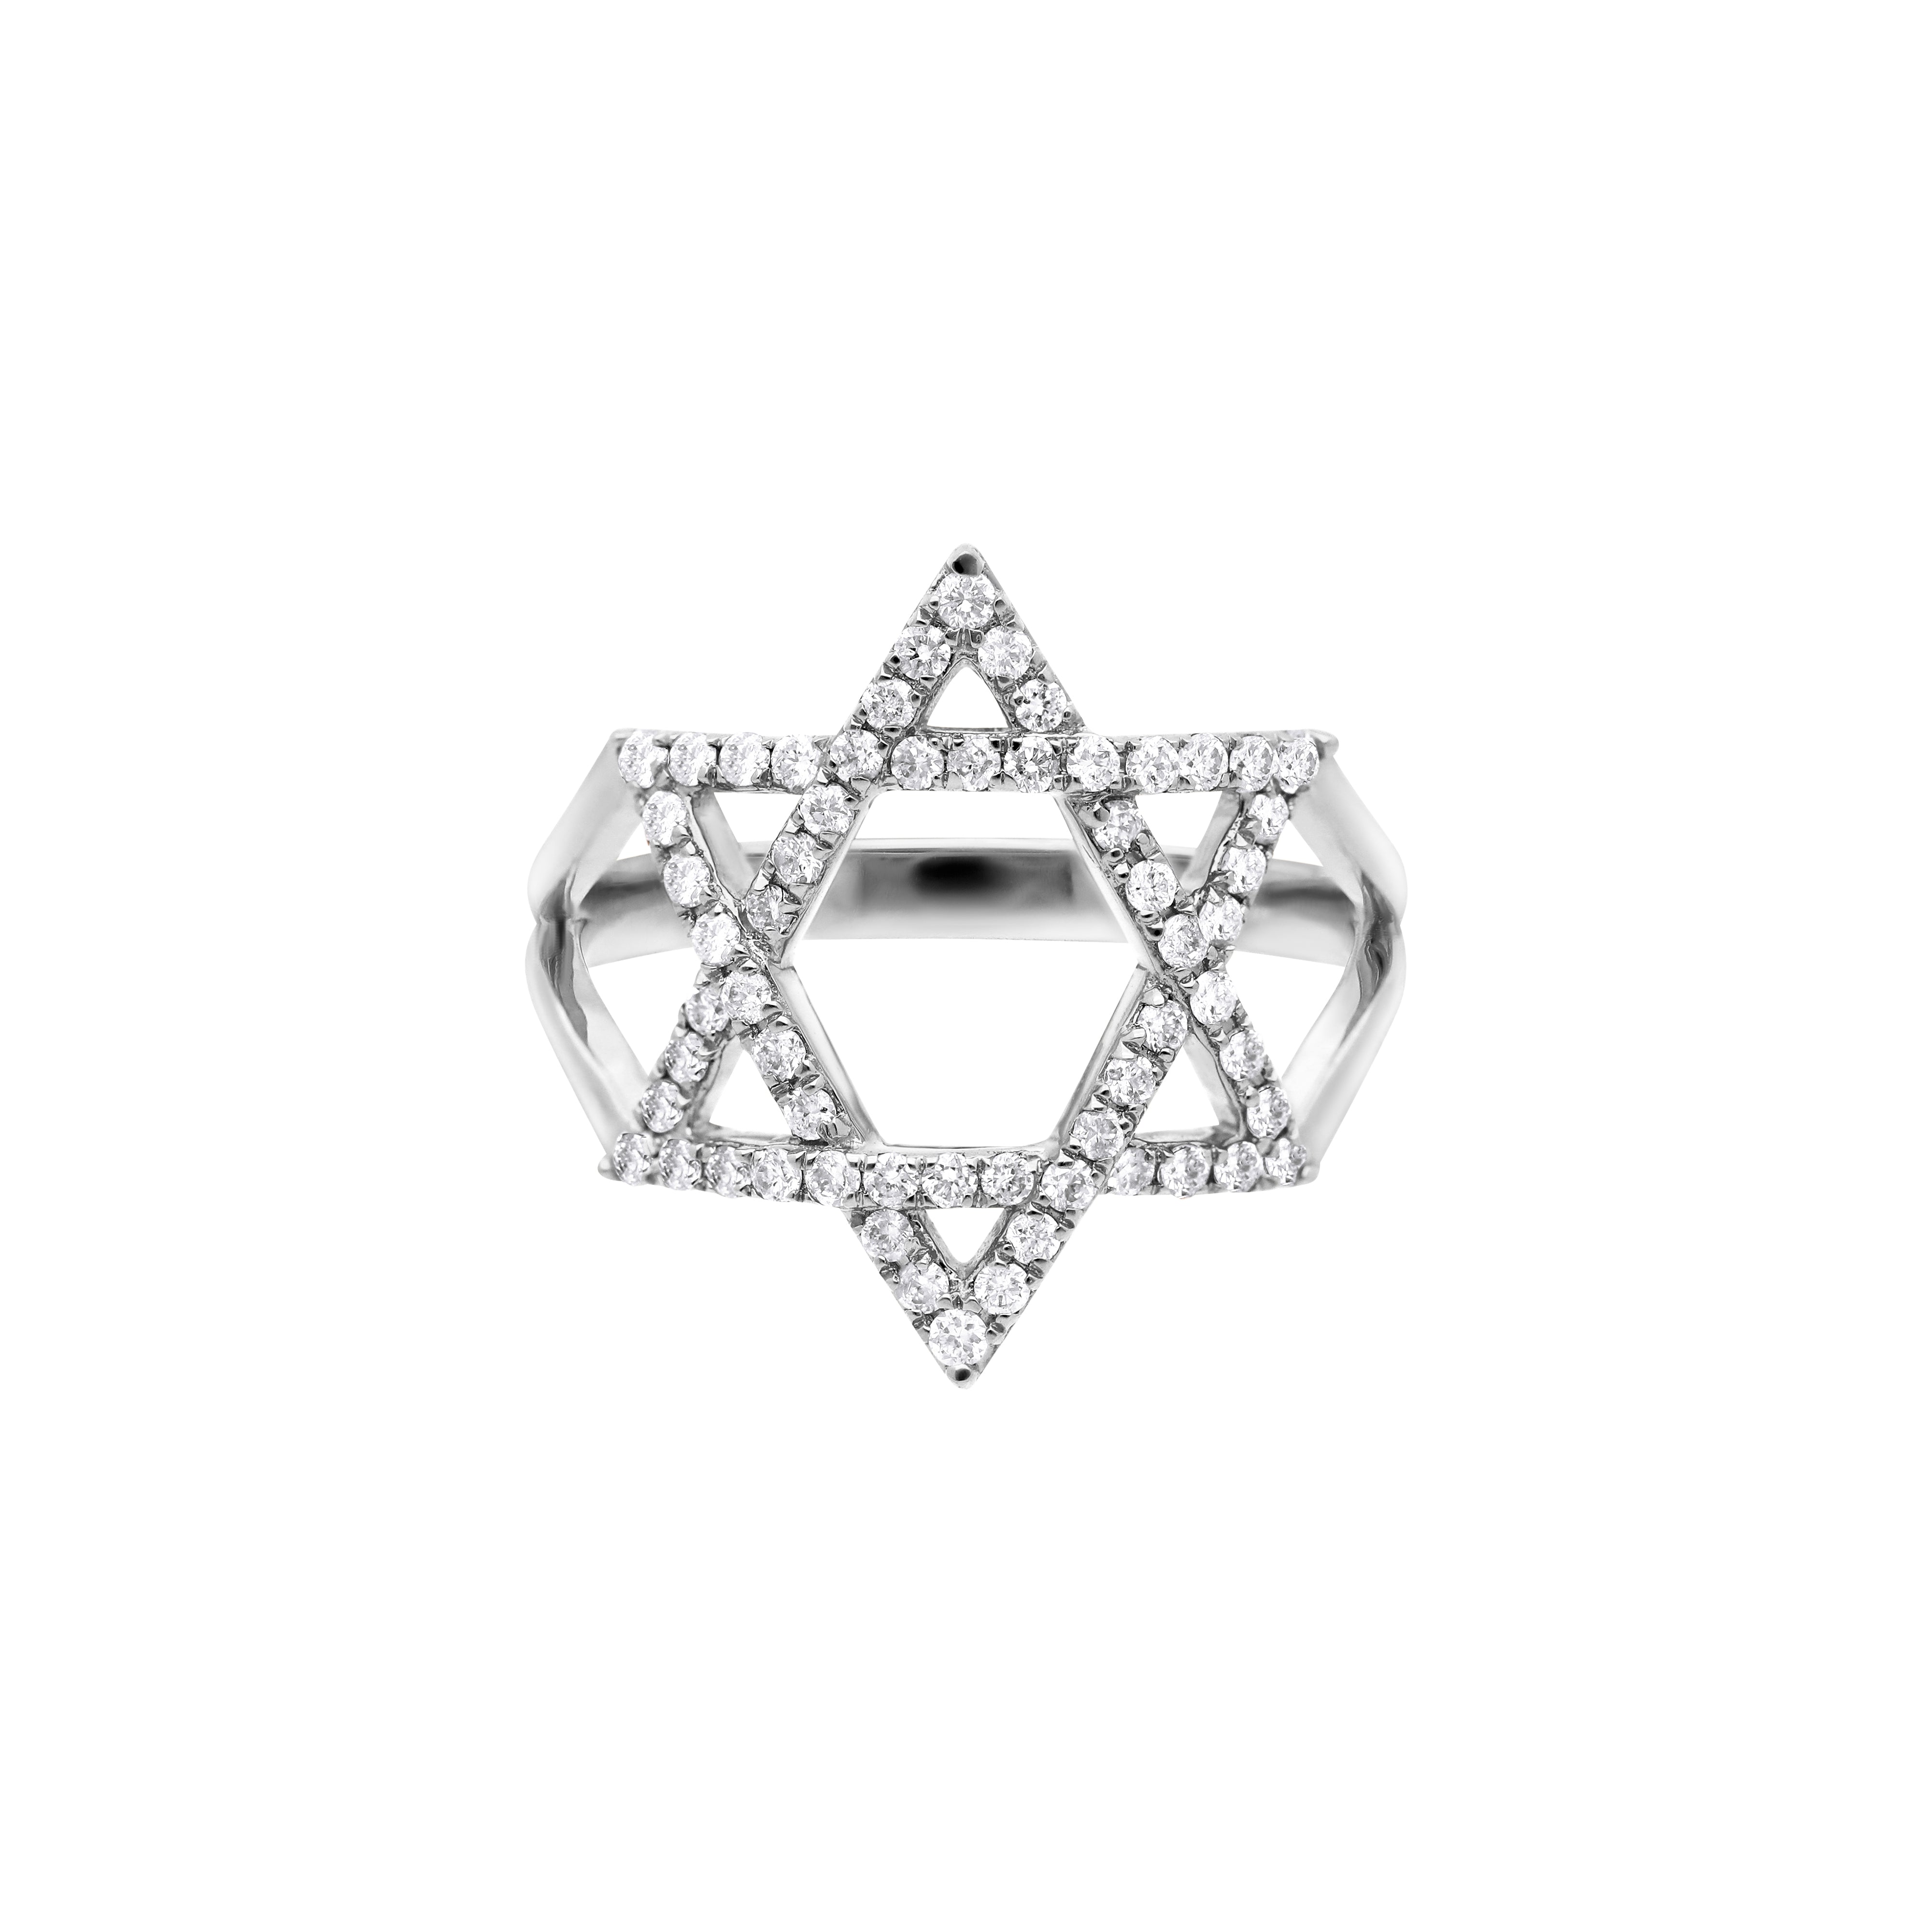 The Mazel Ring